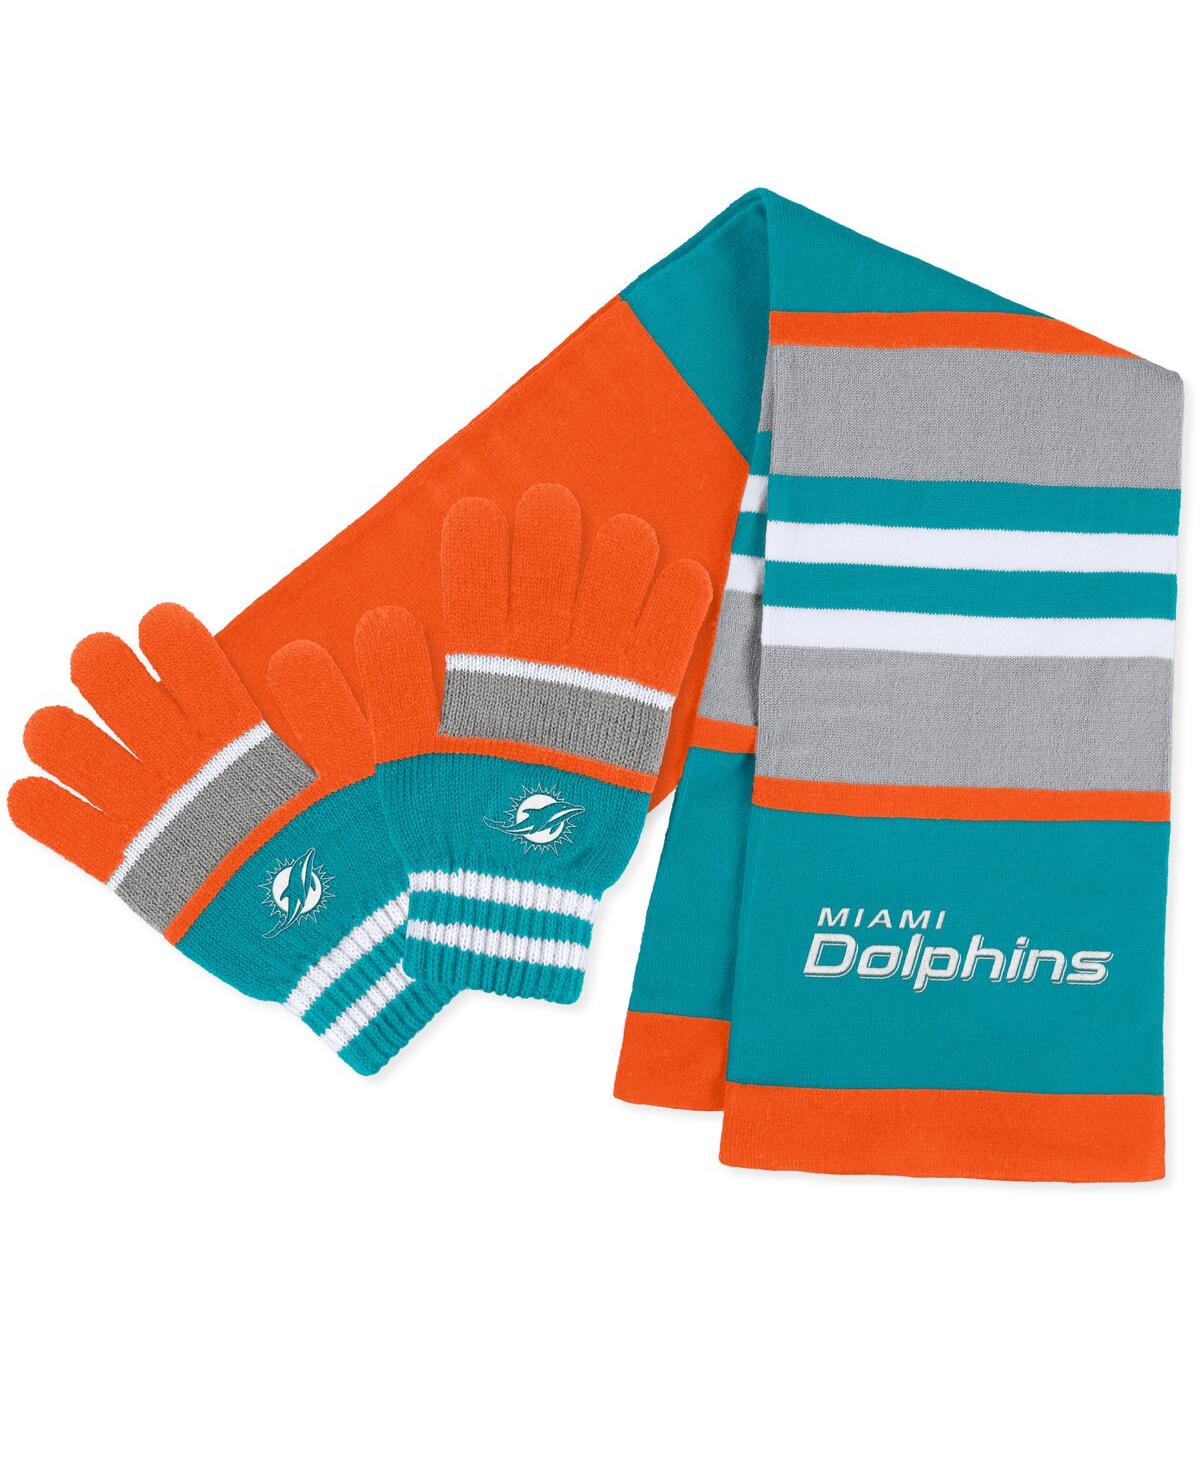 Wear By Erin Andrews Women's  Miami Dolphins Stripe Glove And Scarf Set In Multi